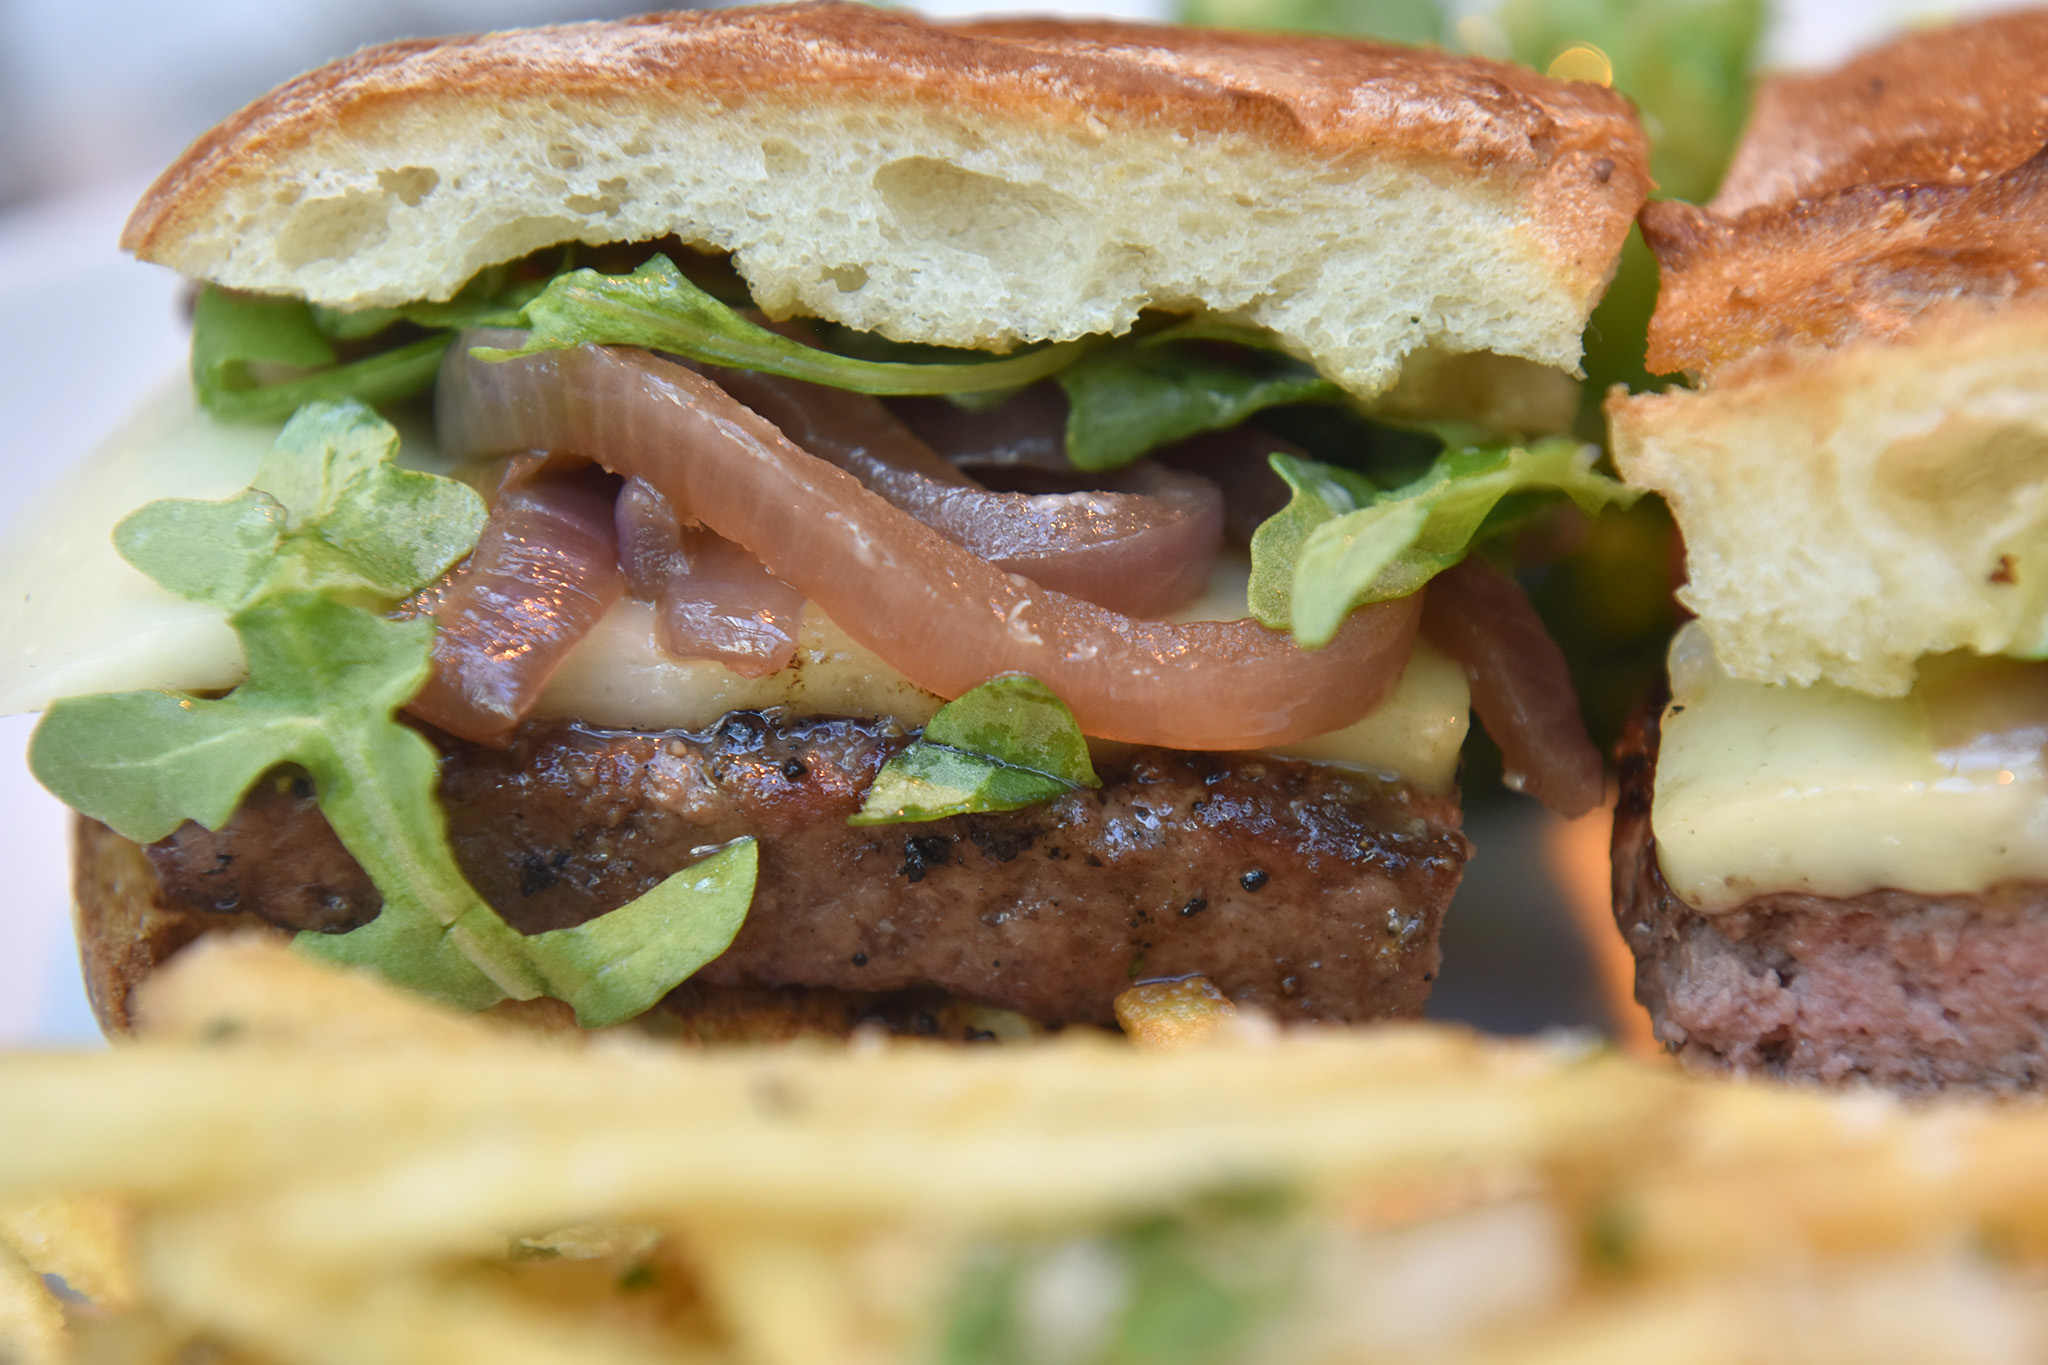 This $30 burger tastes like the death of Francisco